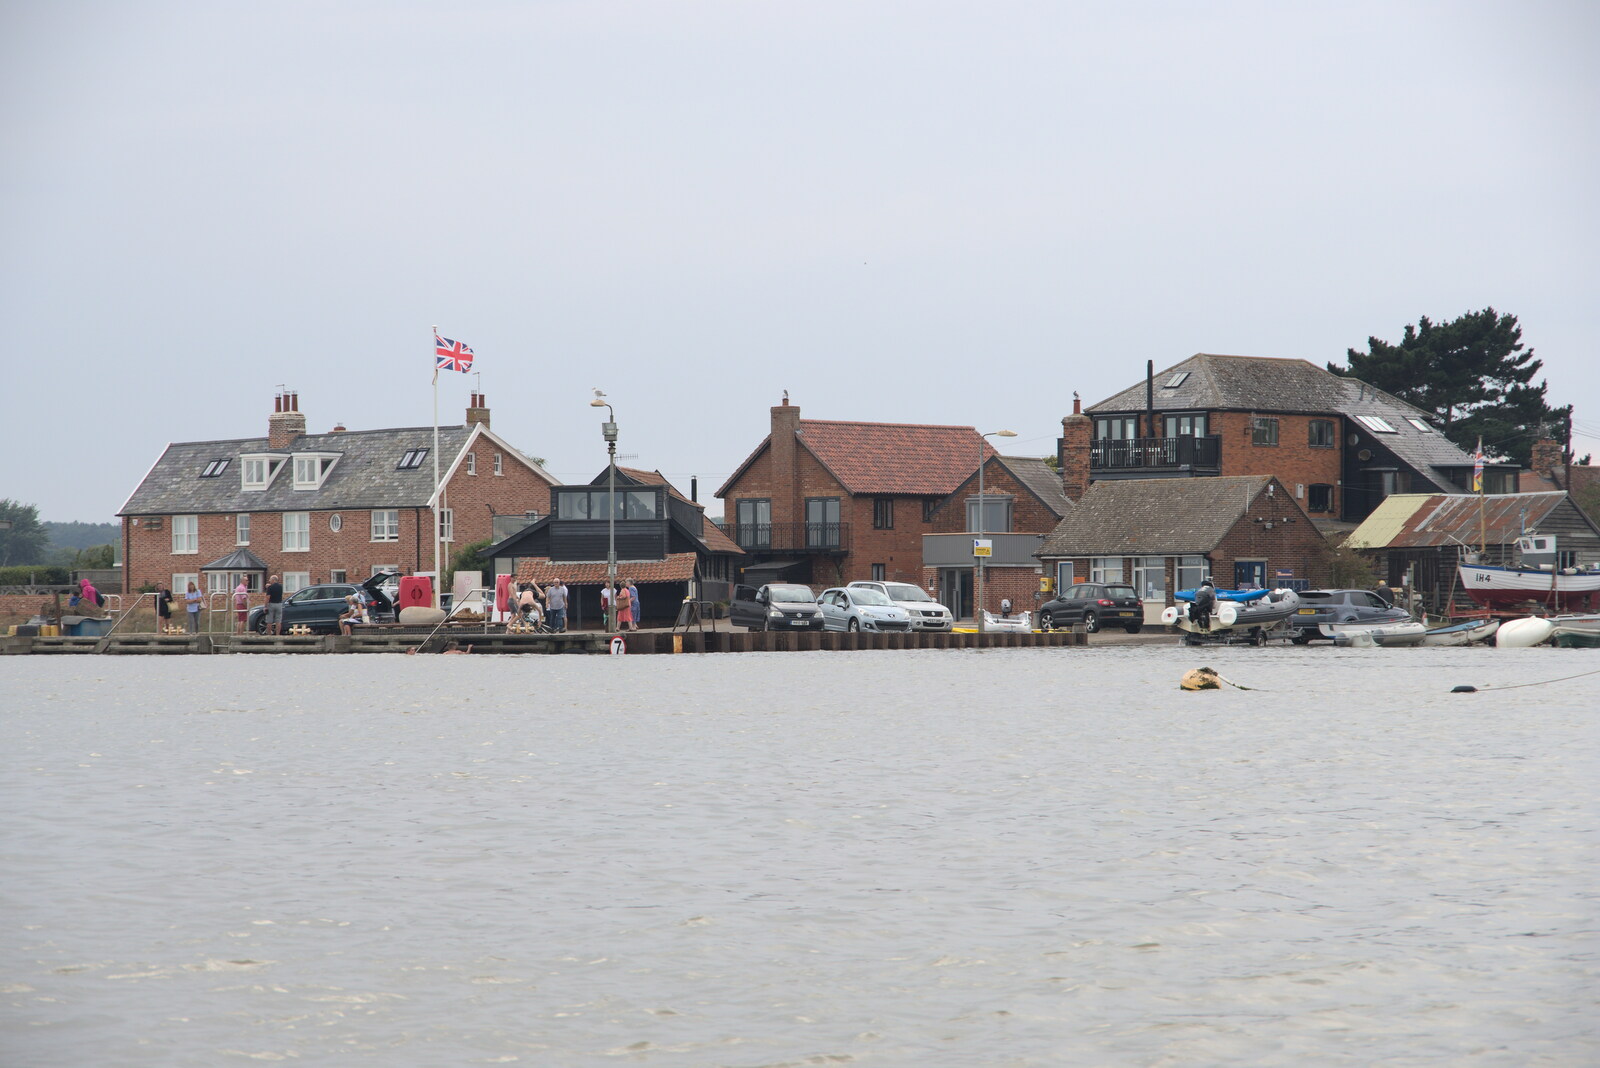 Orford Quay from the ferry on the way back from A Trip to Orford Ness, Orford, Suffolk - 16th August 2022